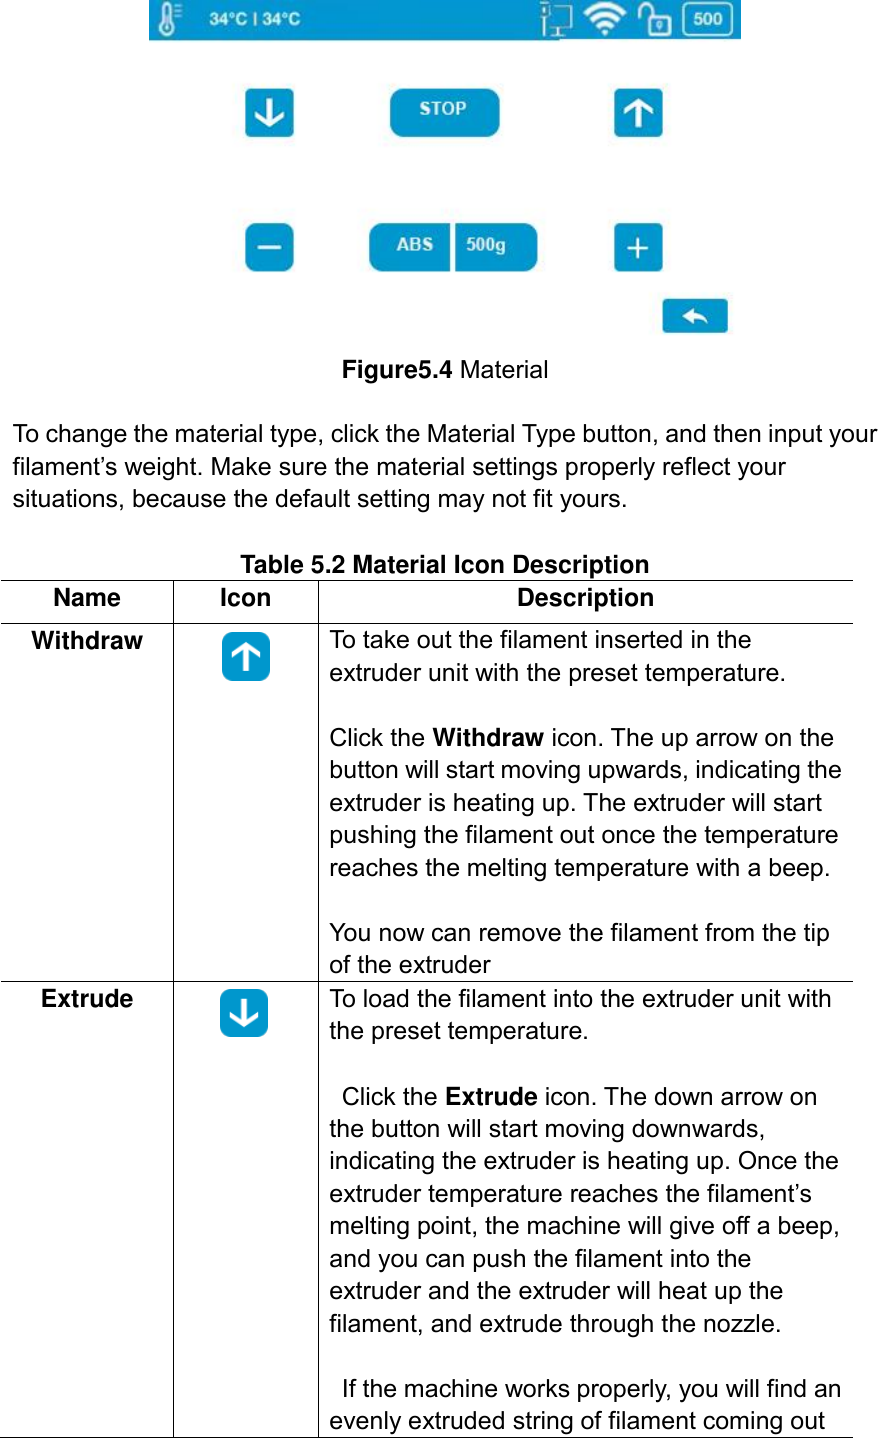  Figure5.4 Material  To change the material type, click the Material Type button, and then input your filament’s weight. Make sure the material settings properly reflect your situations, because the default setting may not fit yours.  Table 5.2 Material Icon Description Name Icon Description Withdraw  To take out the filament inserted in the extruder unit with the preset temperature.    Click the Withdraw icon. The up arrow on the button will start moving upwards, indicating the extruder is heating up. The extruder will start pushing the filament out once the temperature reaches the melting temperature with a beep.    You now can remove the filament from the tip of the extruder Extrude  To load the filament into the extruder unit with the preset temperature.    Click the Extrude icon. The down arrow on the button will start moving downwards, indicating the extruder is heating up. Once the extruder temperature reaches the filament’s melting point, the machine will give off a beep, and you can push the filament into the extruder and the extruder will heat up the filament, and extrude through the nozzle.    If the machine works properly, you will find an evenly extruded string of filament coming out 